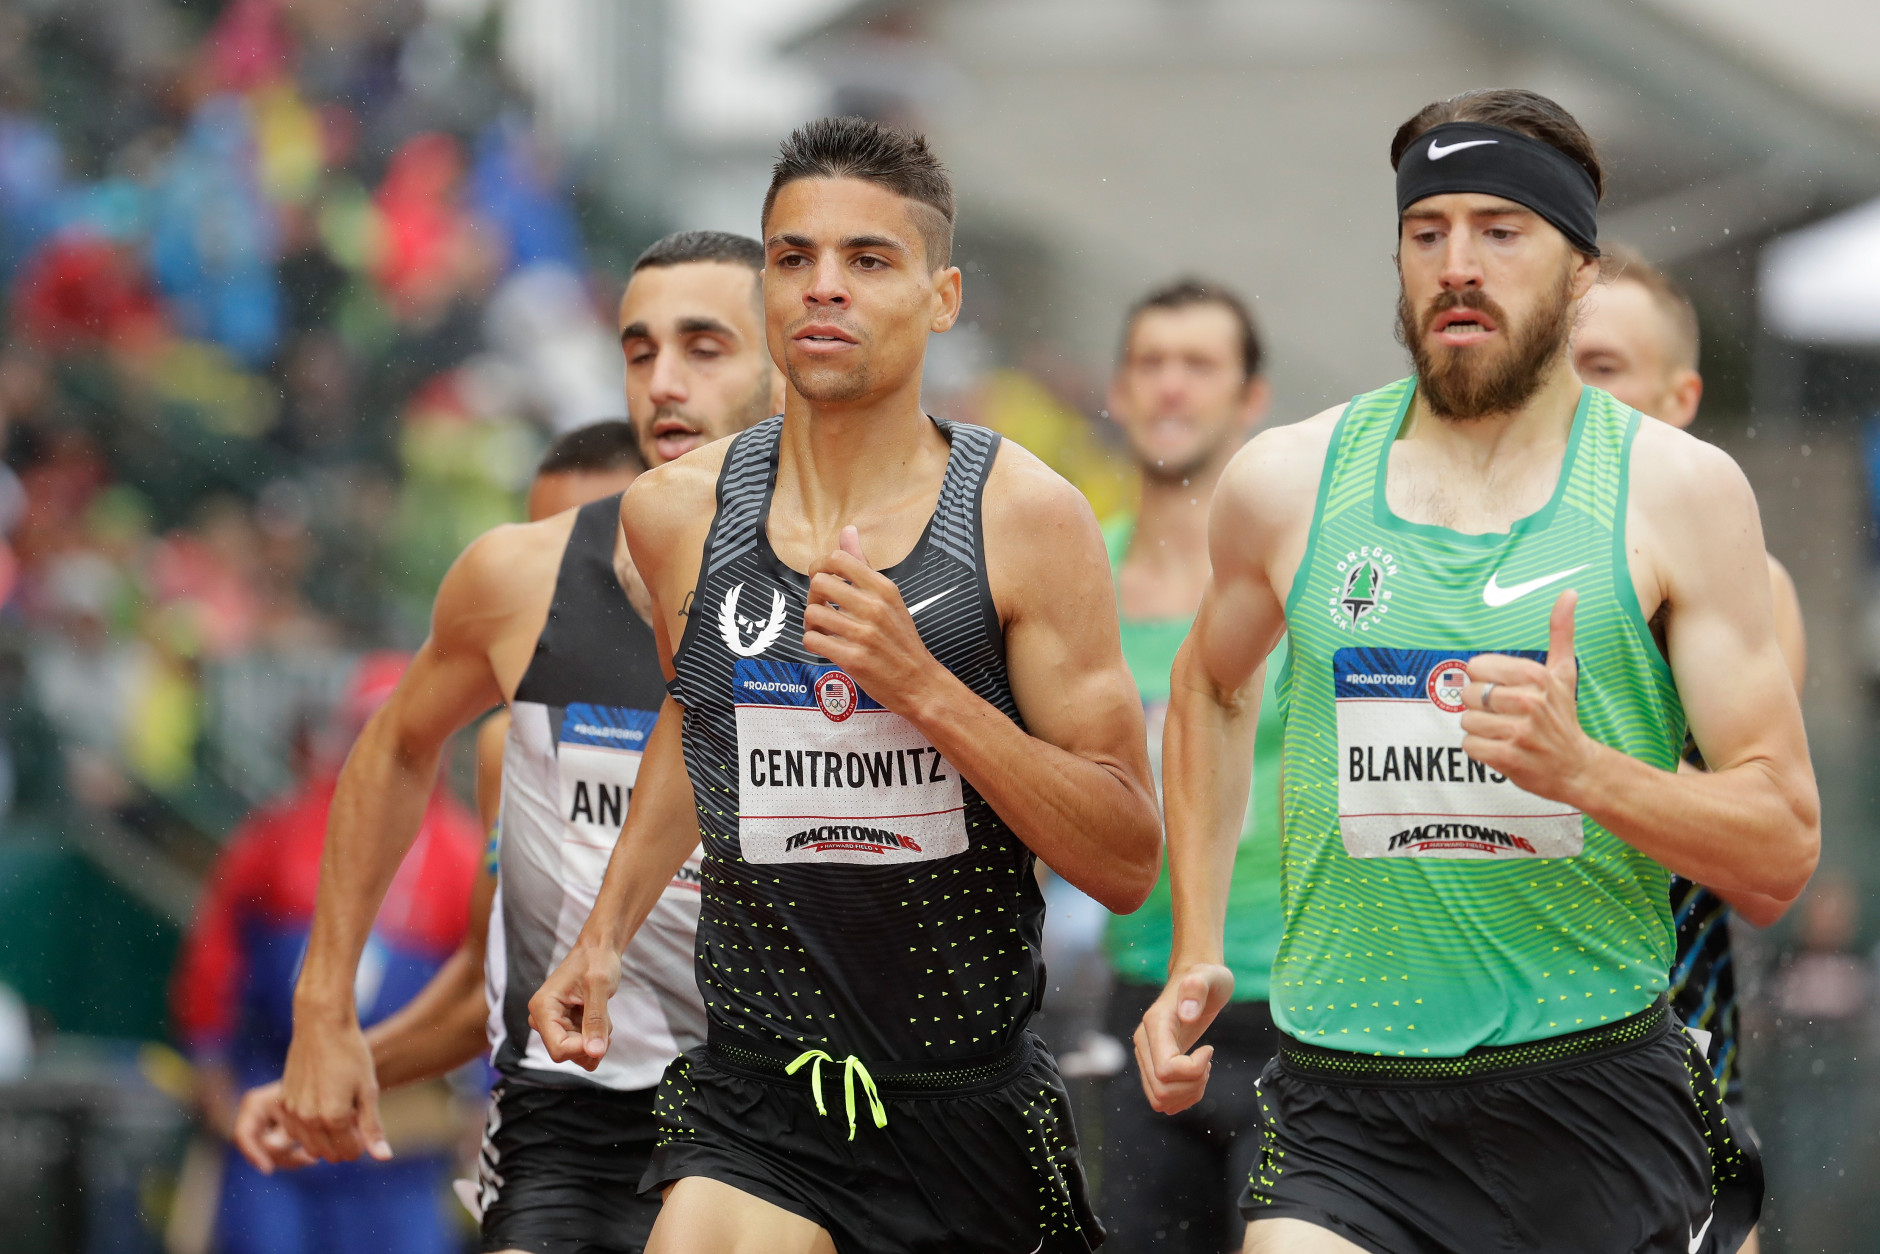 EUGENE, OR - JULY 08:  Ben Blankenship, Matthew Centrowitz and Robby Andrews compete in the Men's 1500 Meter Semi-Finals during the 2016 U.S. Olympic Track &amp; Field Team Trials at Hayward Field on July 8, 2016 in Eugene, Oregon.  (Photo by Andy Lyons/Getty Images)